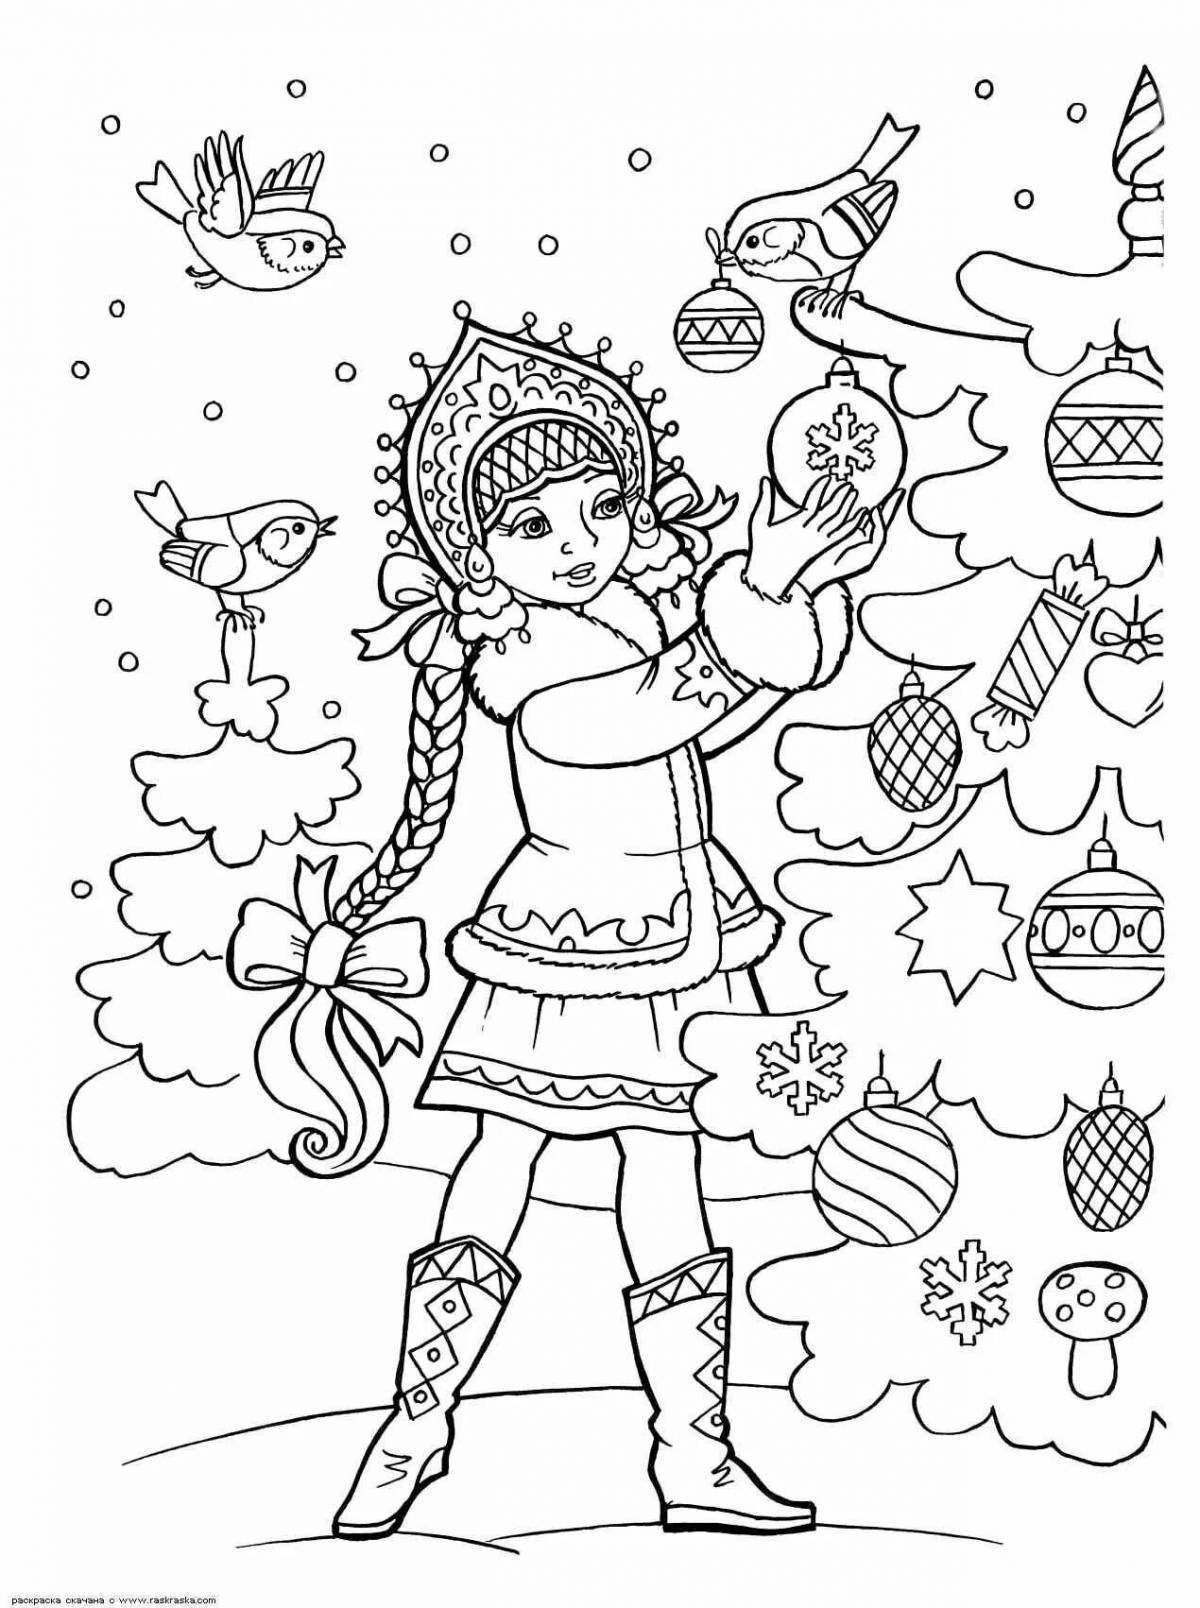 Christmas coloring book #3